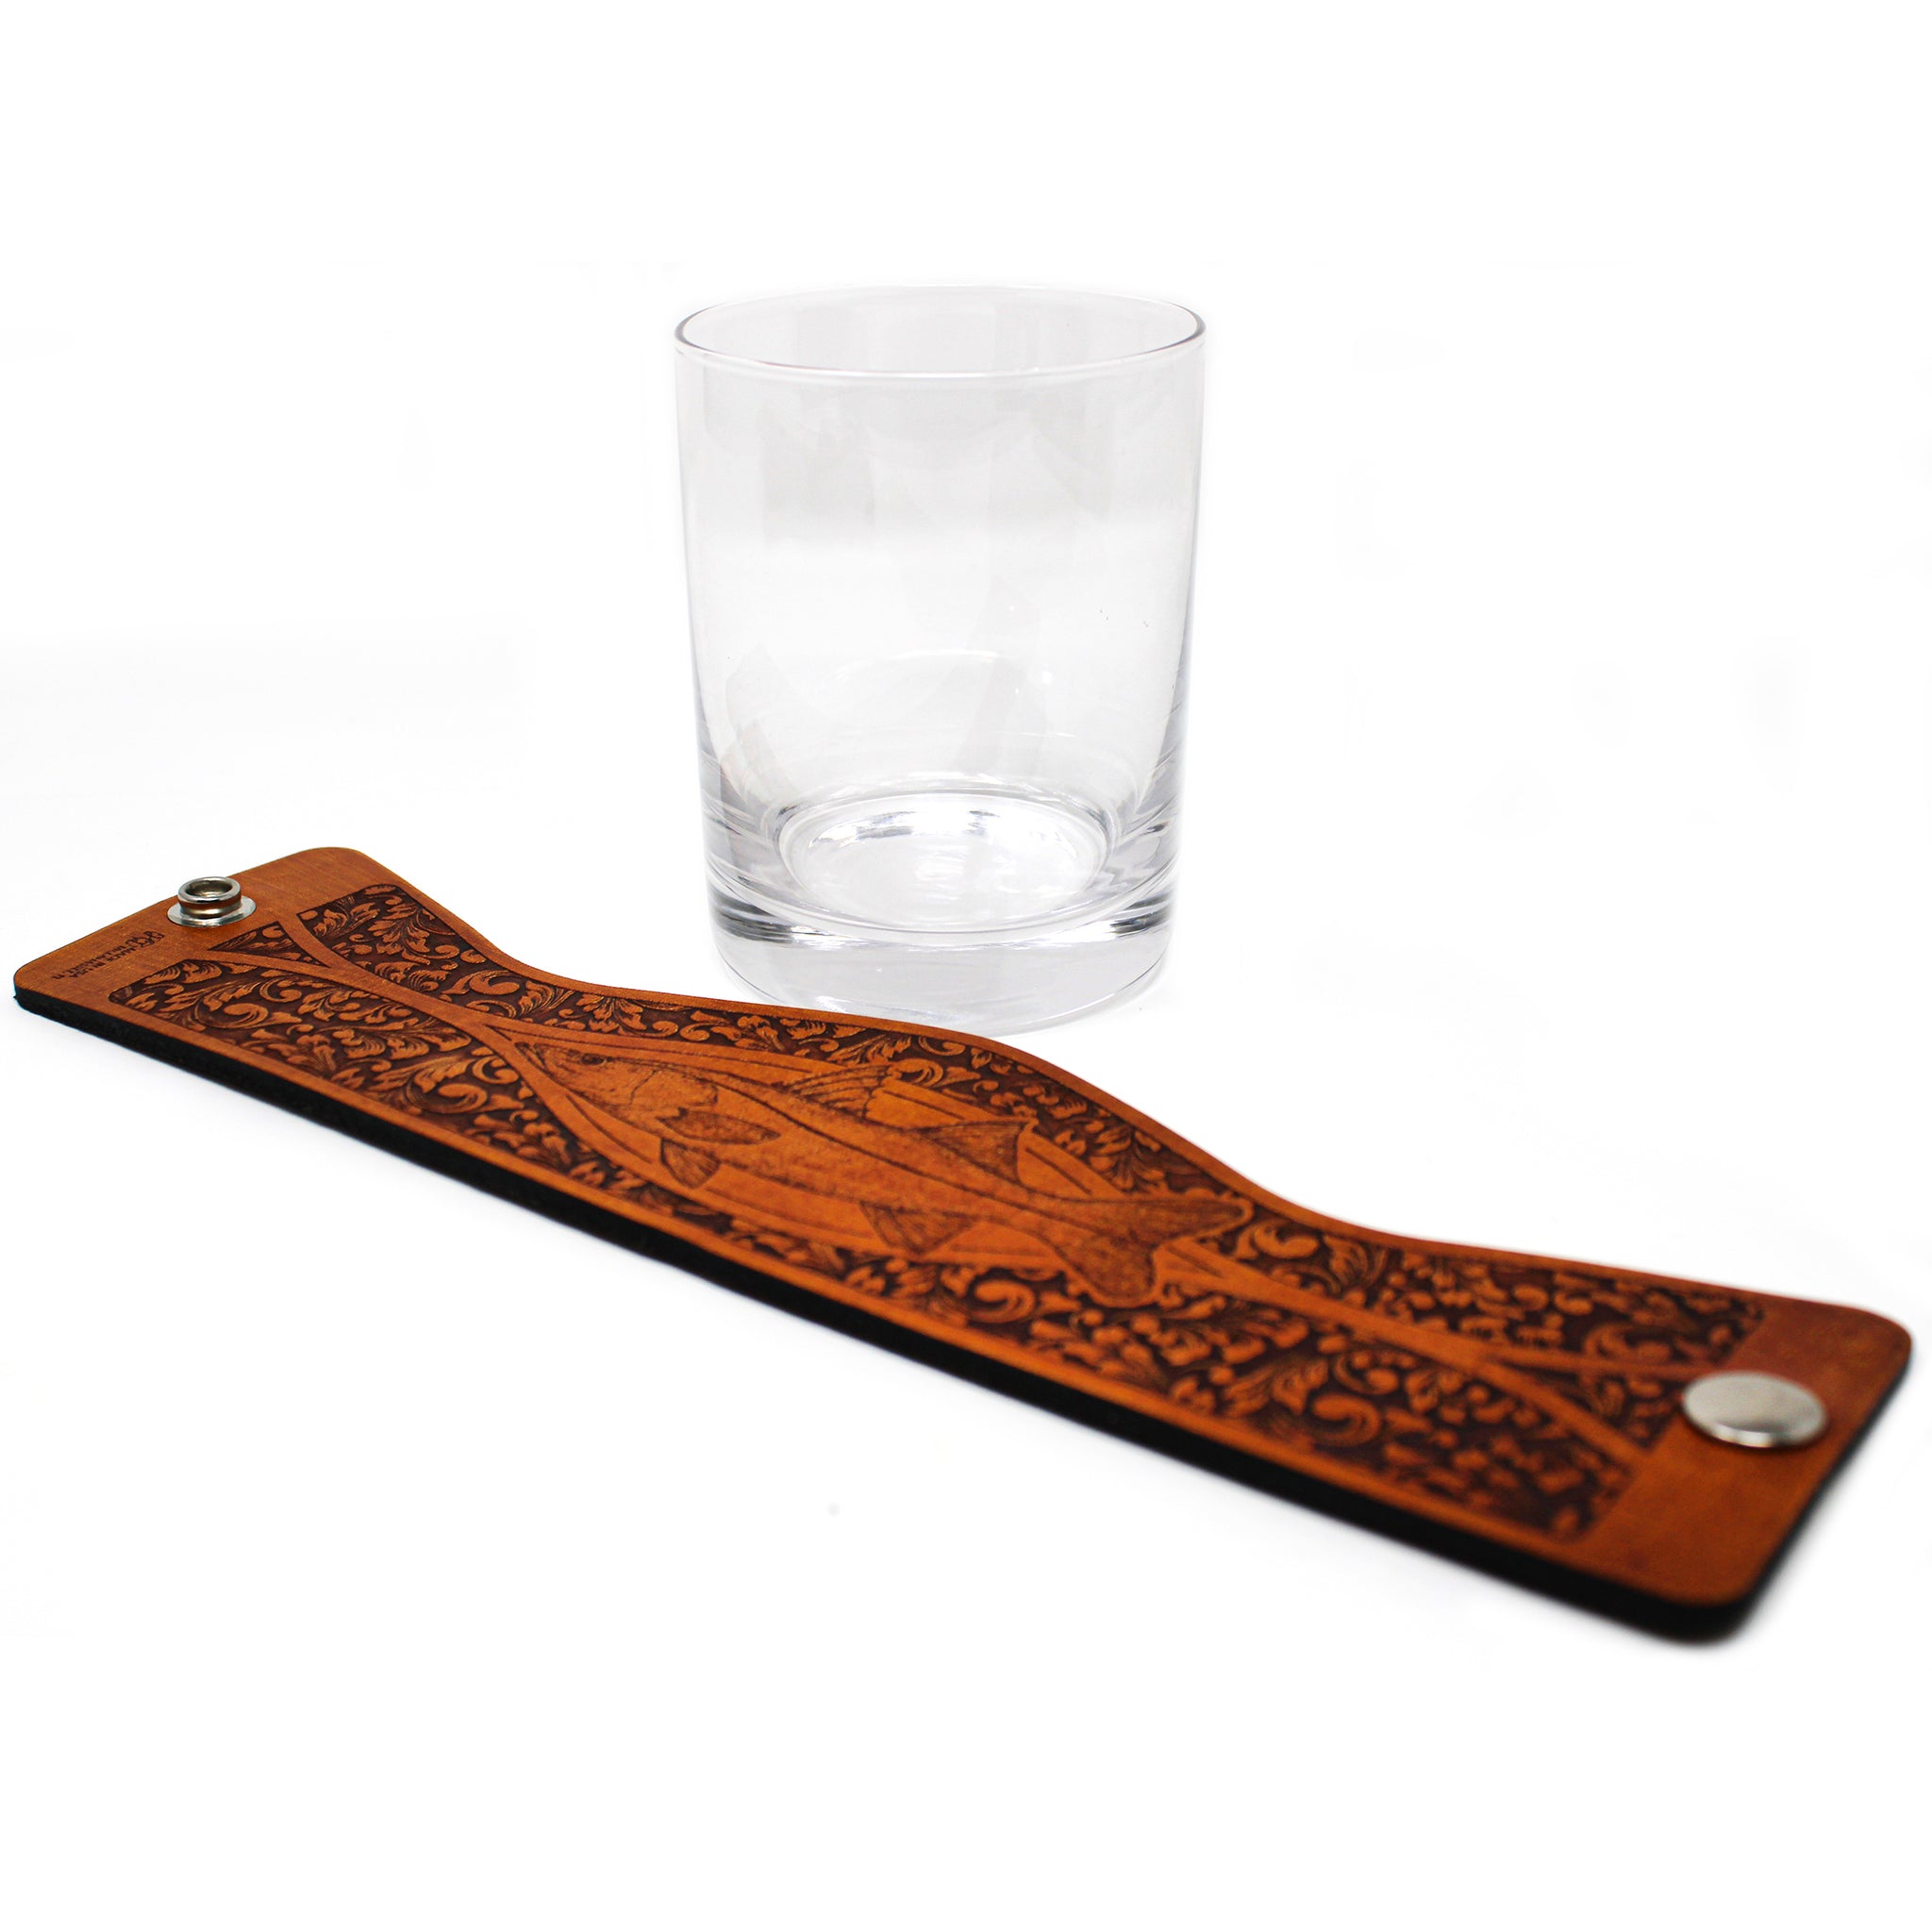 Whiskey Glass Leather Wrap - Snook Engraver glass